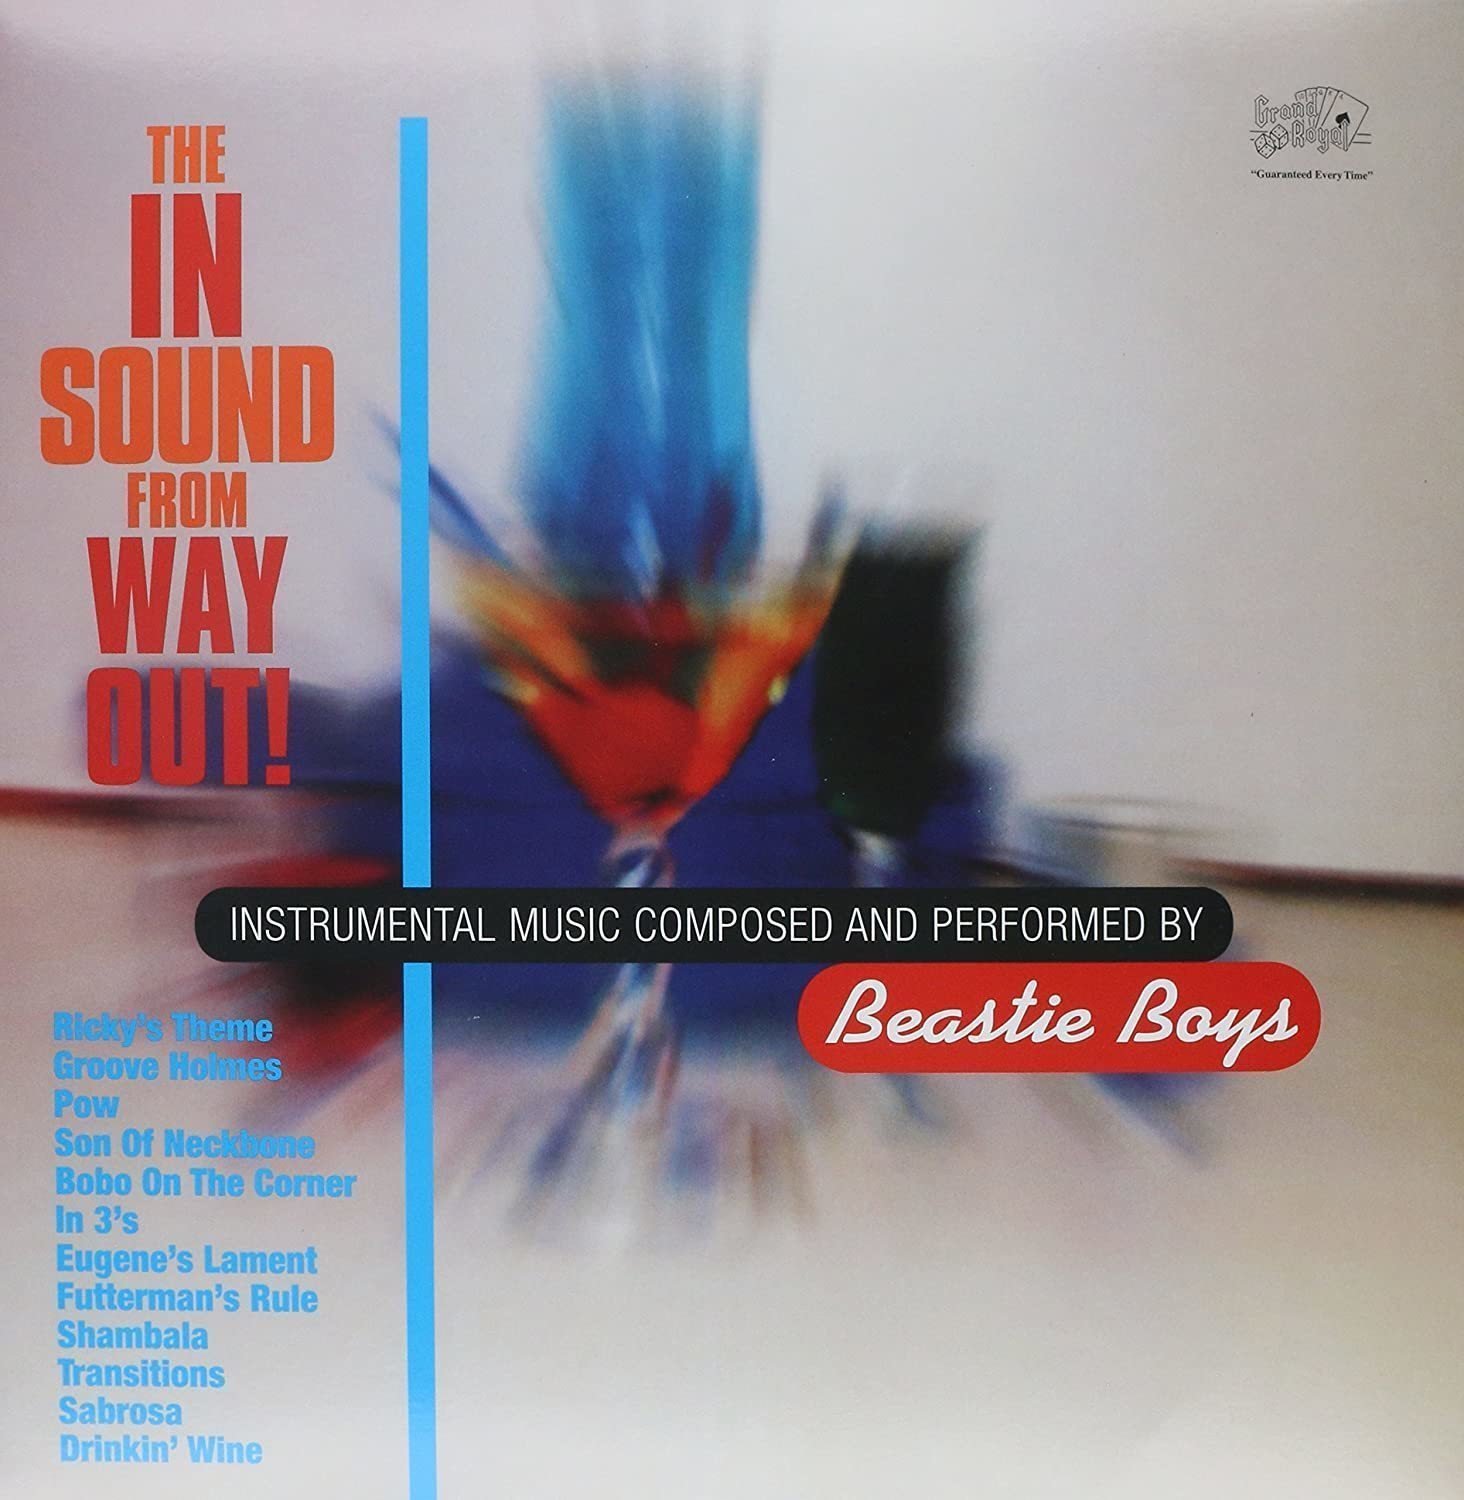 LP ploča Beastie Boys - The In Sound From Way Out (LP)